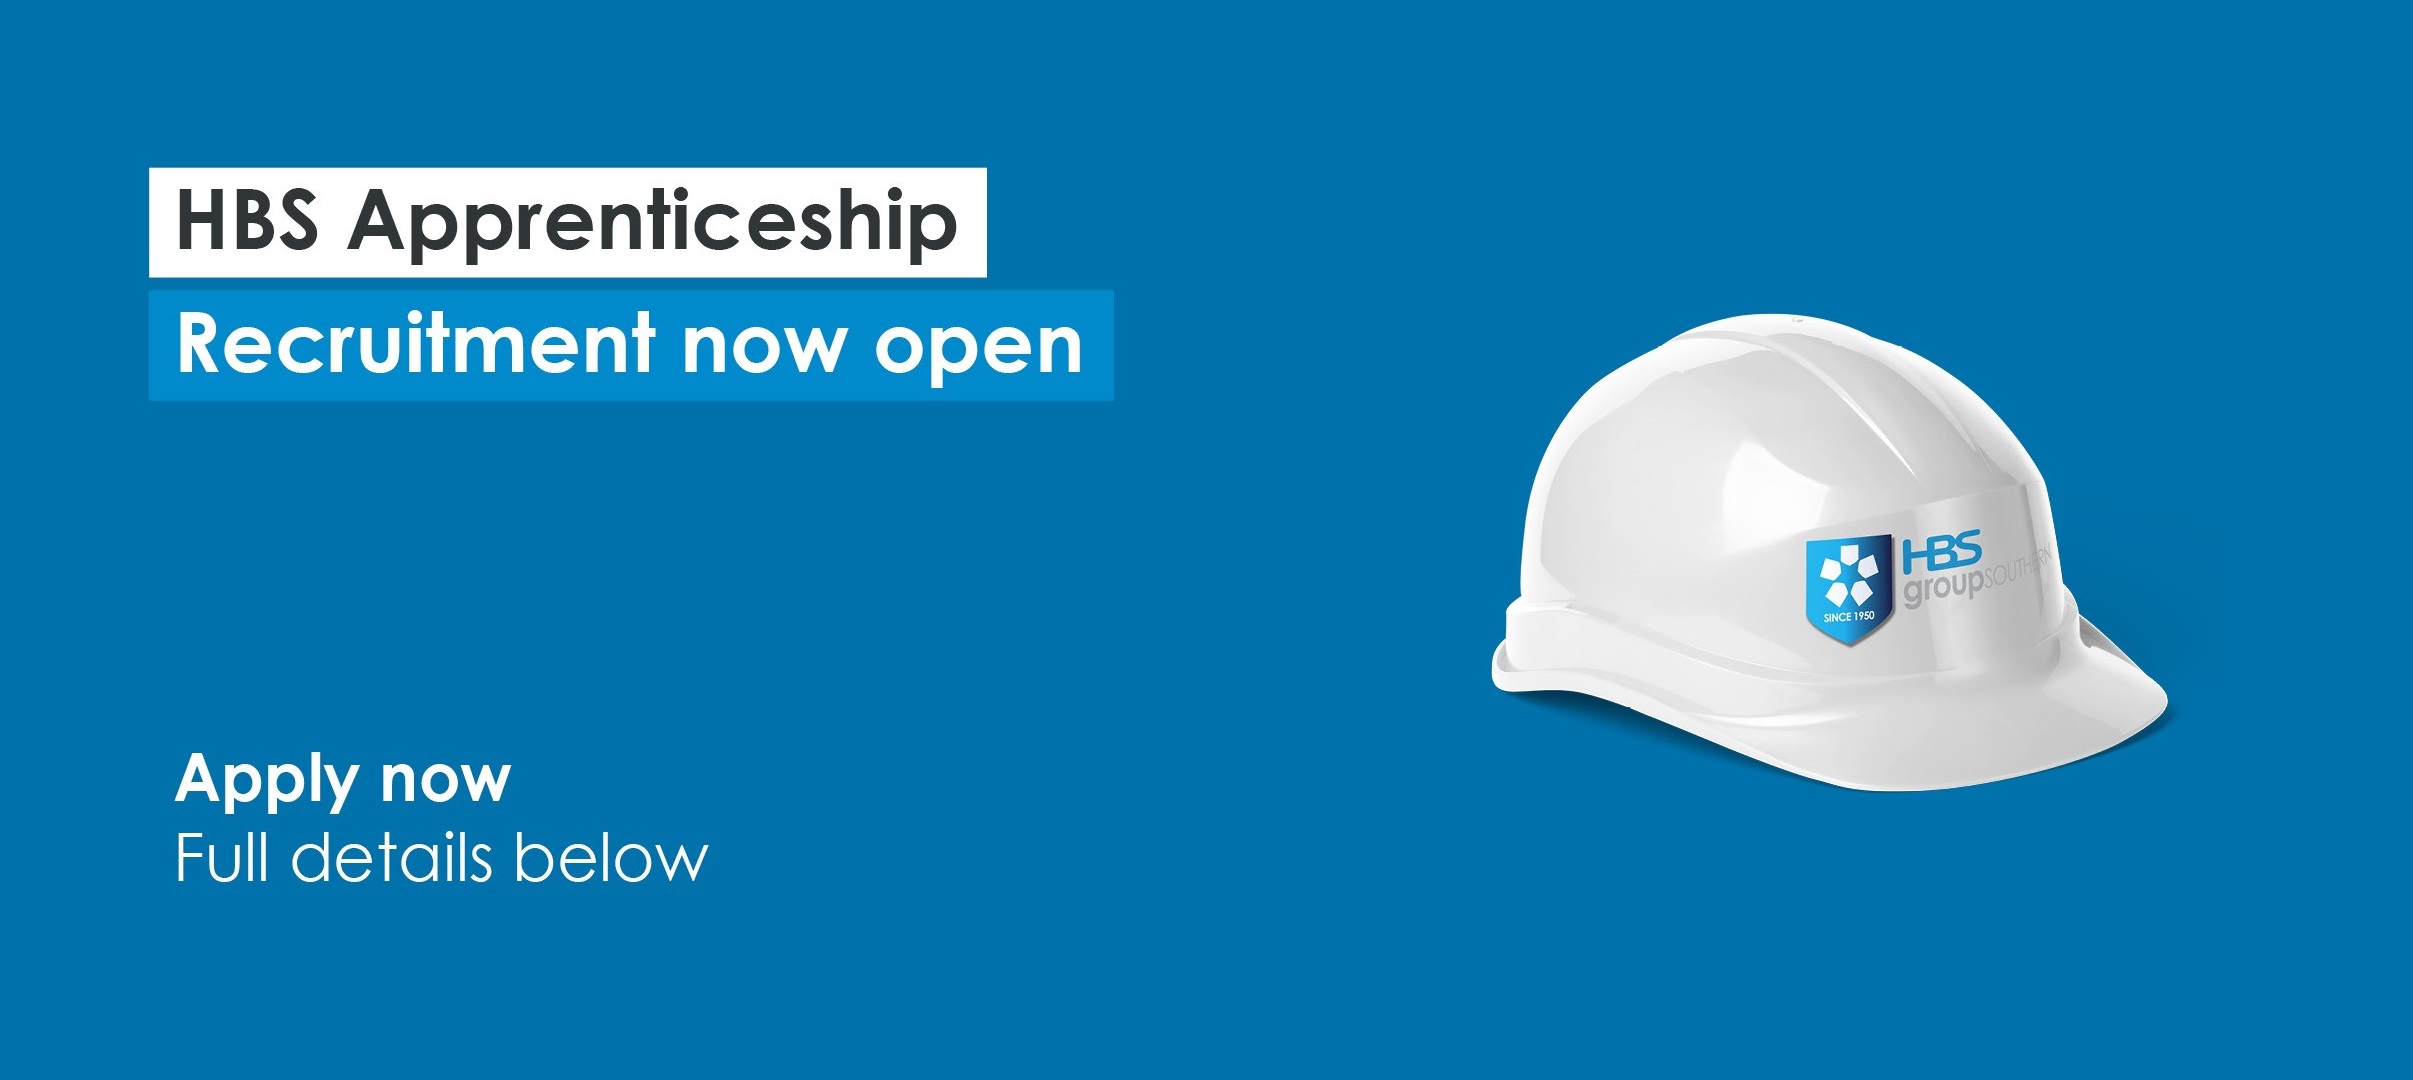 hbs group southern apprenticeship recruitment now open for 2021